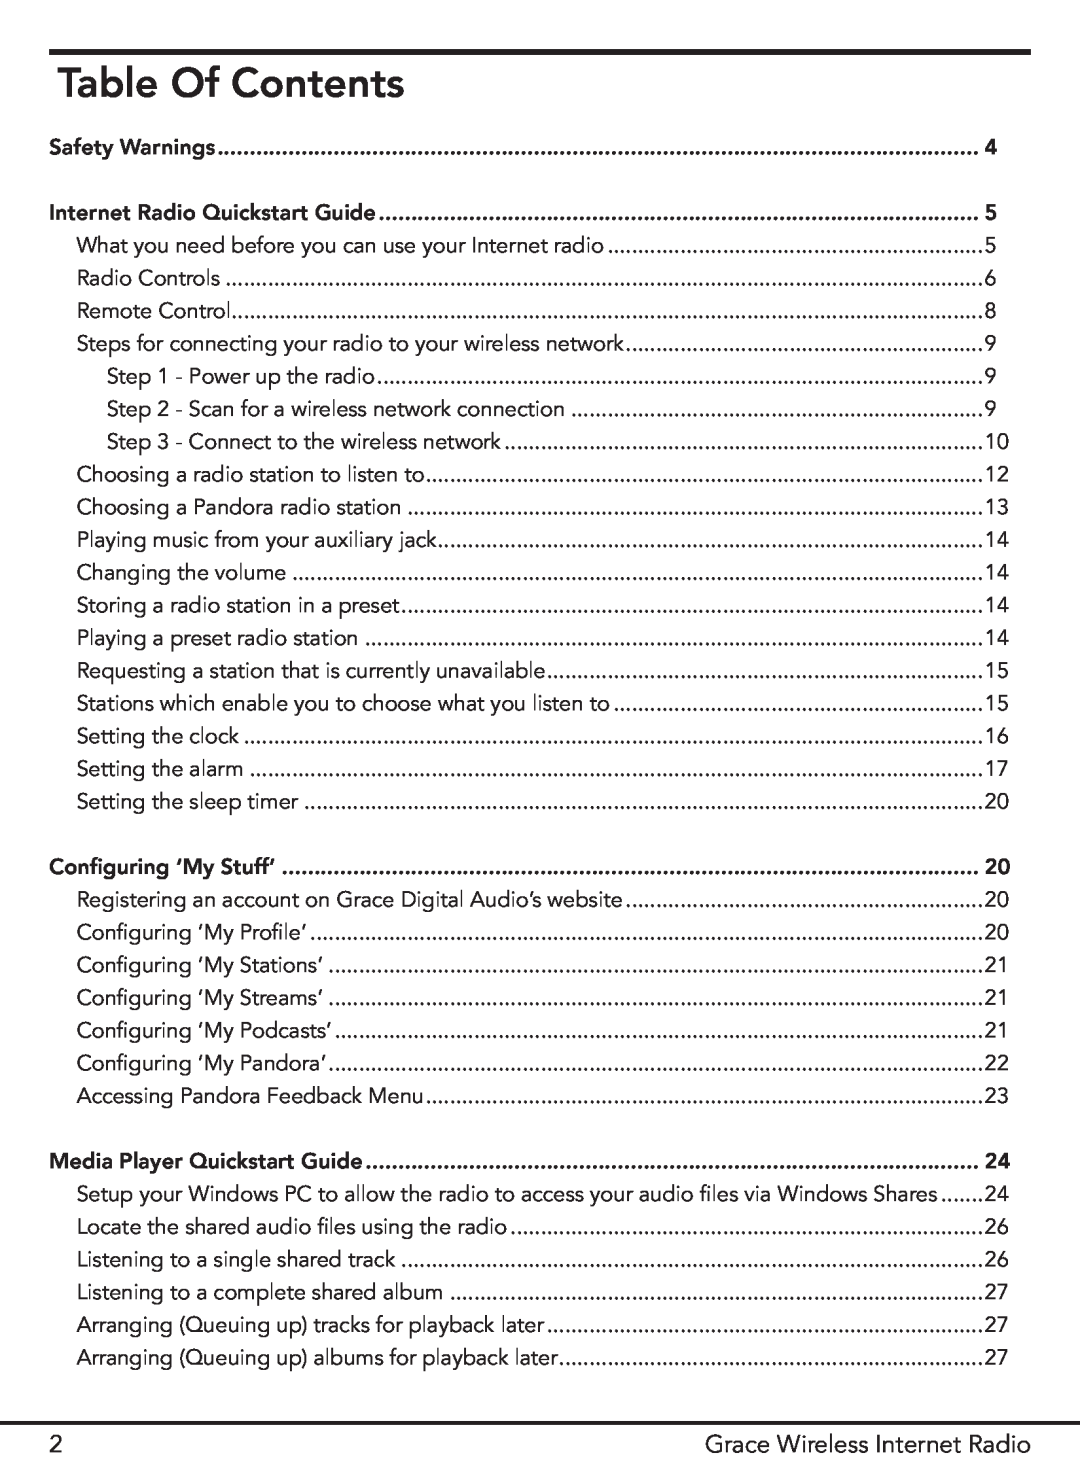 Grace GDI-IR2000 manual Table Of Contents 